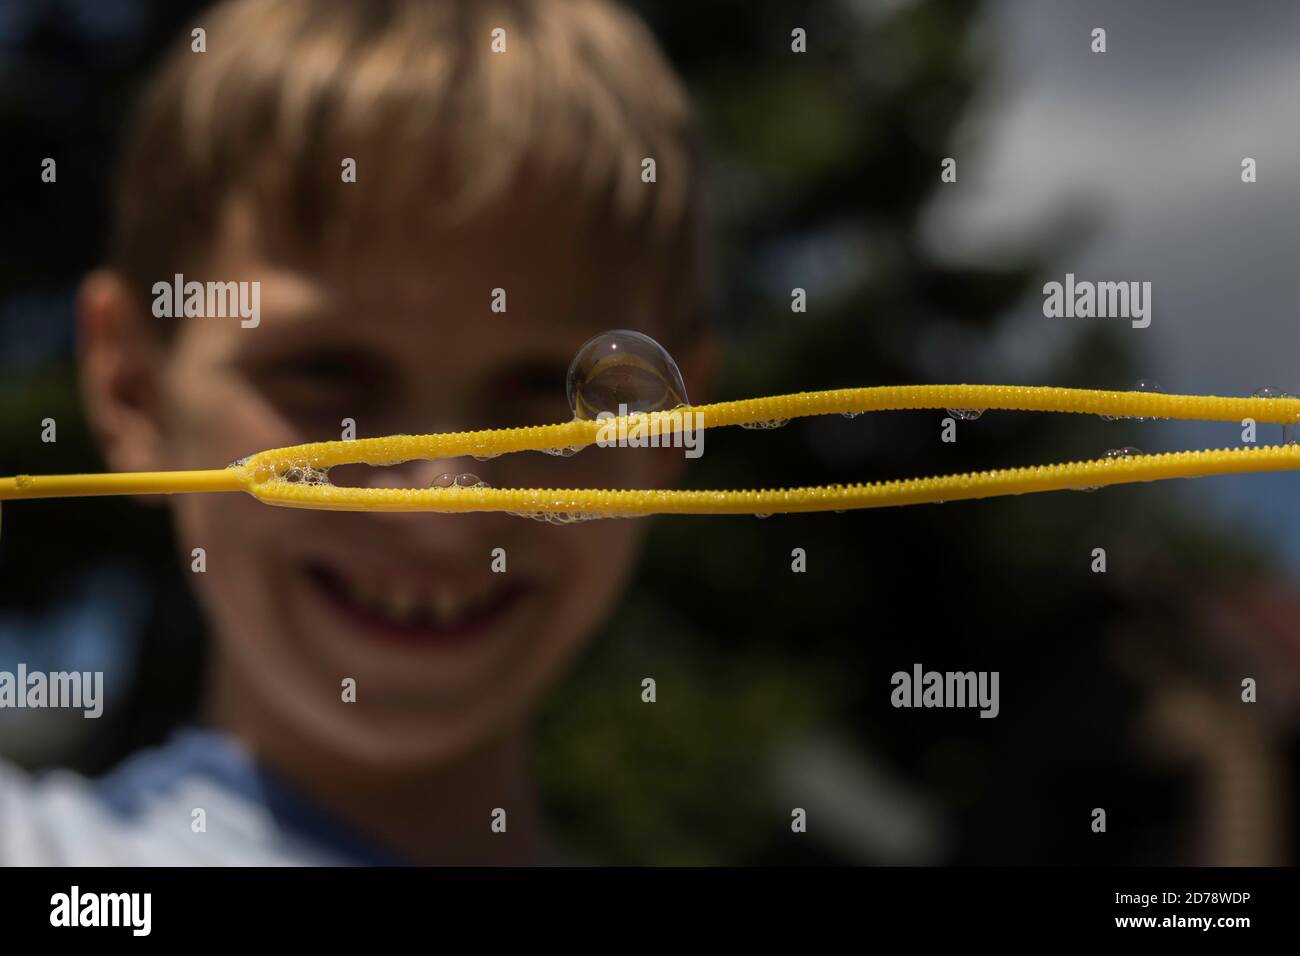 Soap bubble on a wand with boy in a blurred background Stock Photo